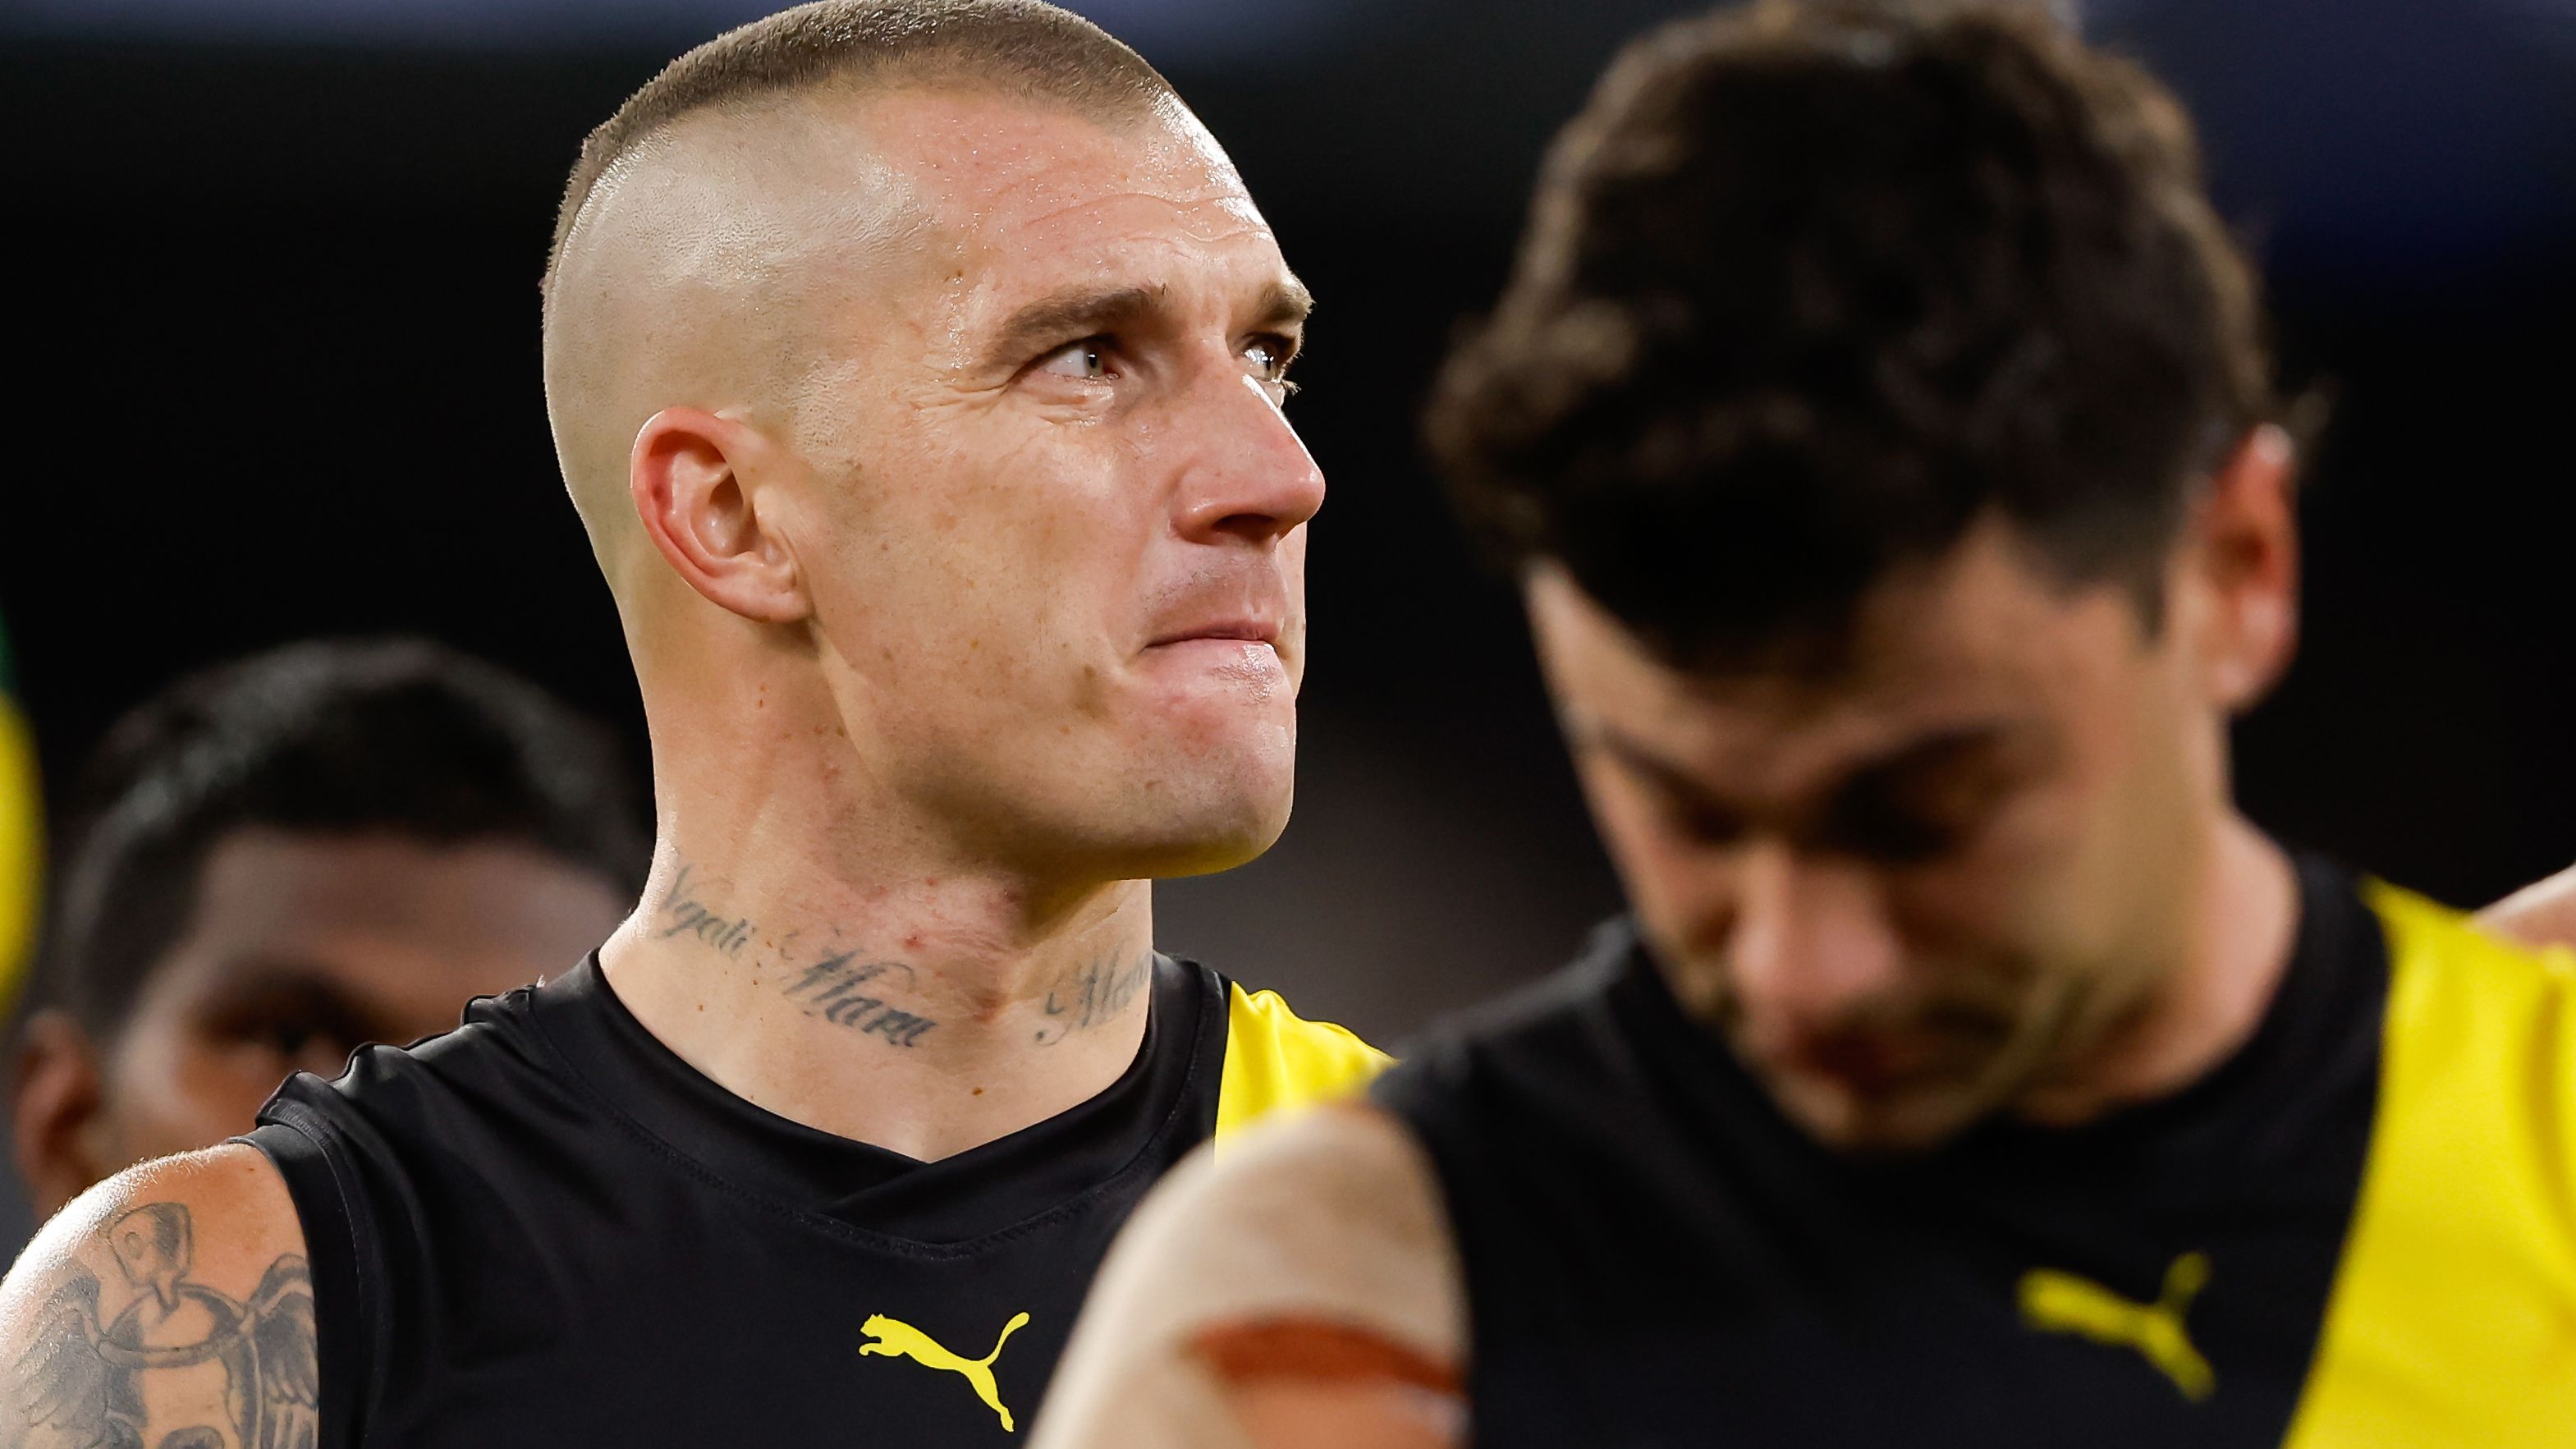 Dustin Martin could likely retire a one-club player.